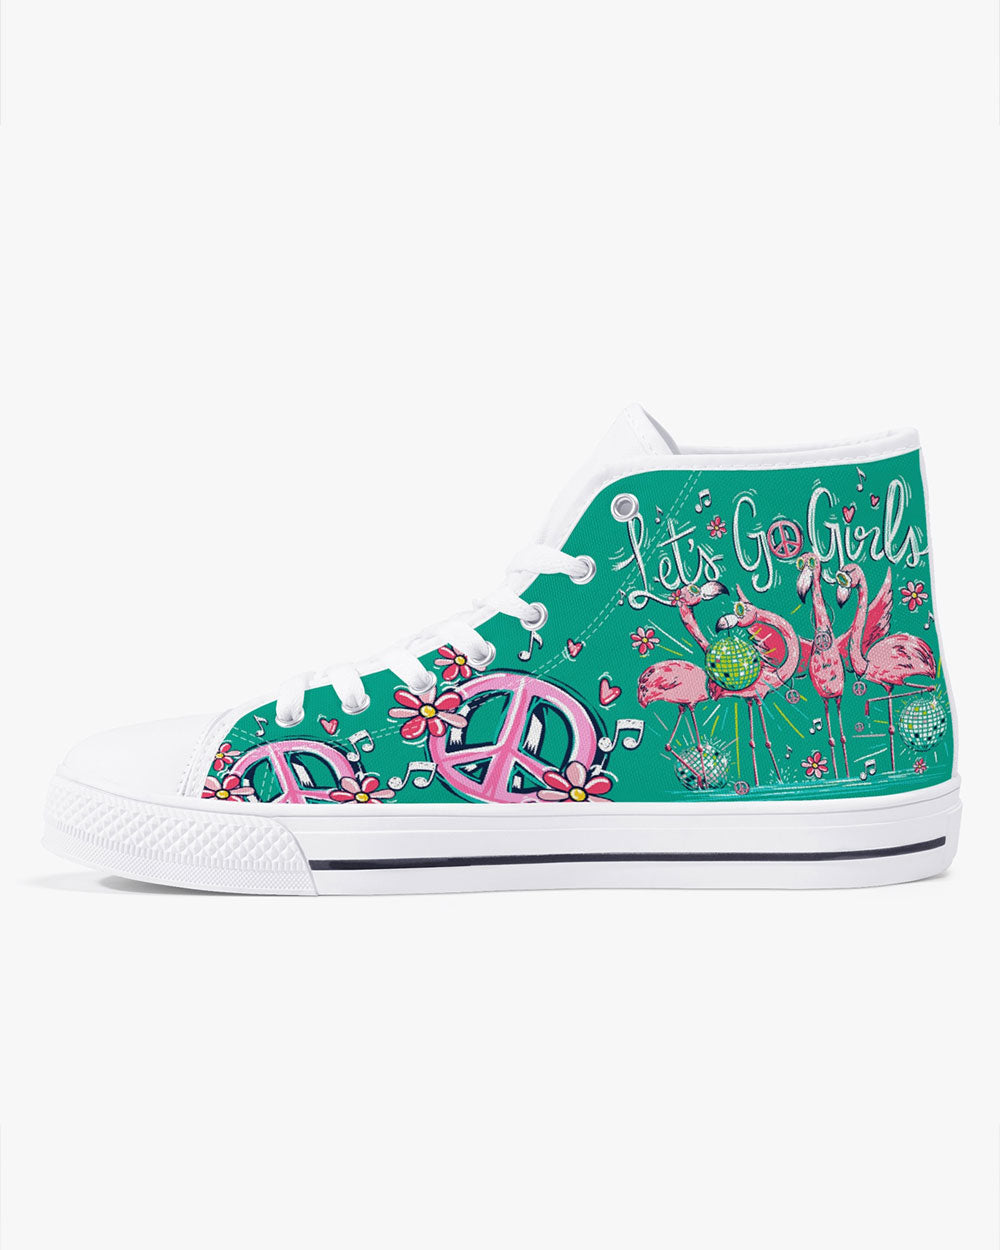 LET'S GO GIRLS FLAMINGO HIGH TOP CANVAS SHOES - TY1906235